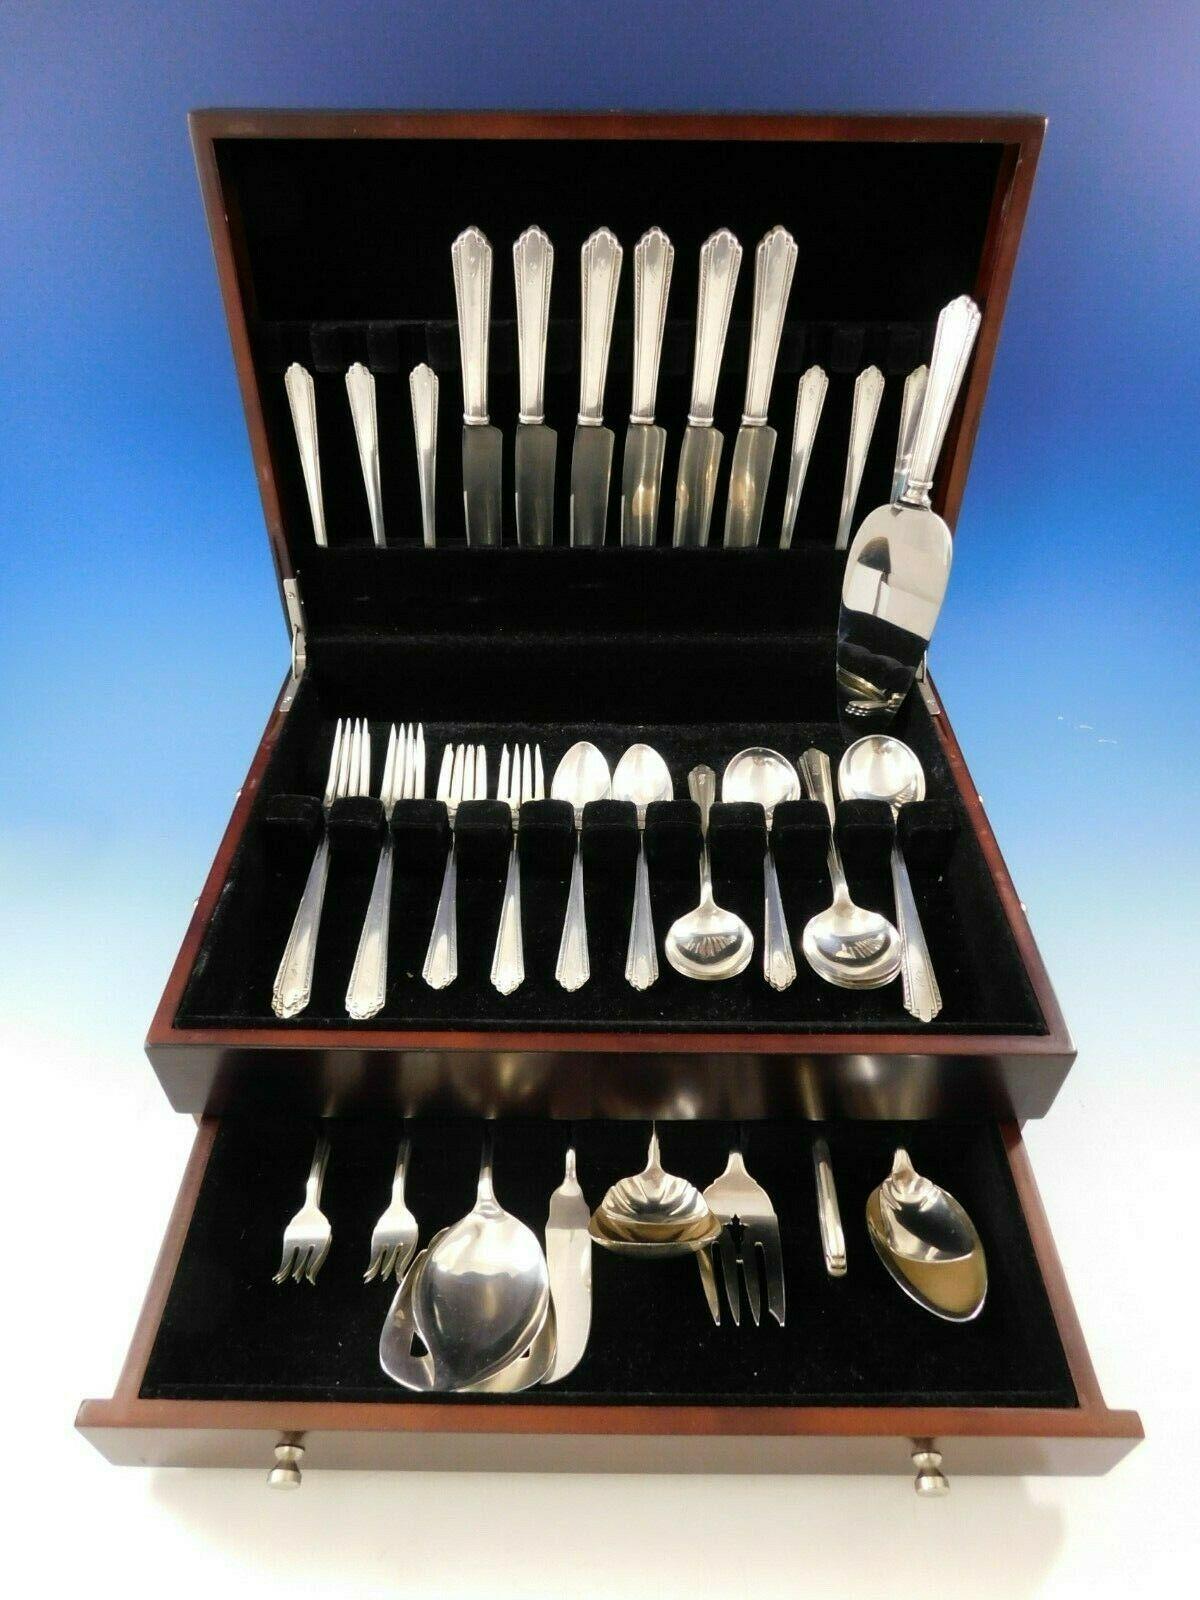 Stunning Art Deco pattern Park Avenue by Manchester sterling silver Flatware set, 59 pieces. This set includes:

6 knives, 8 3/4